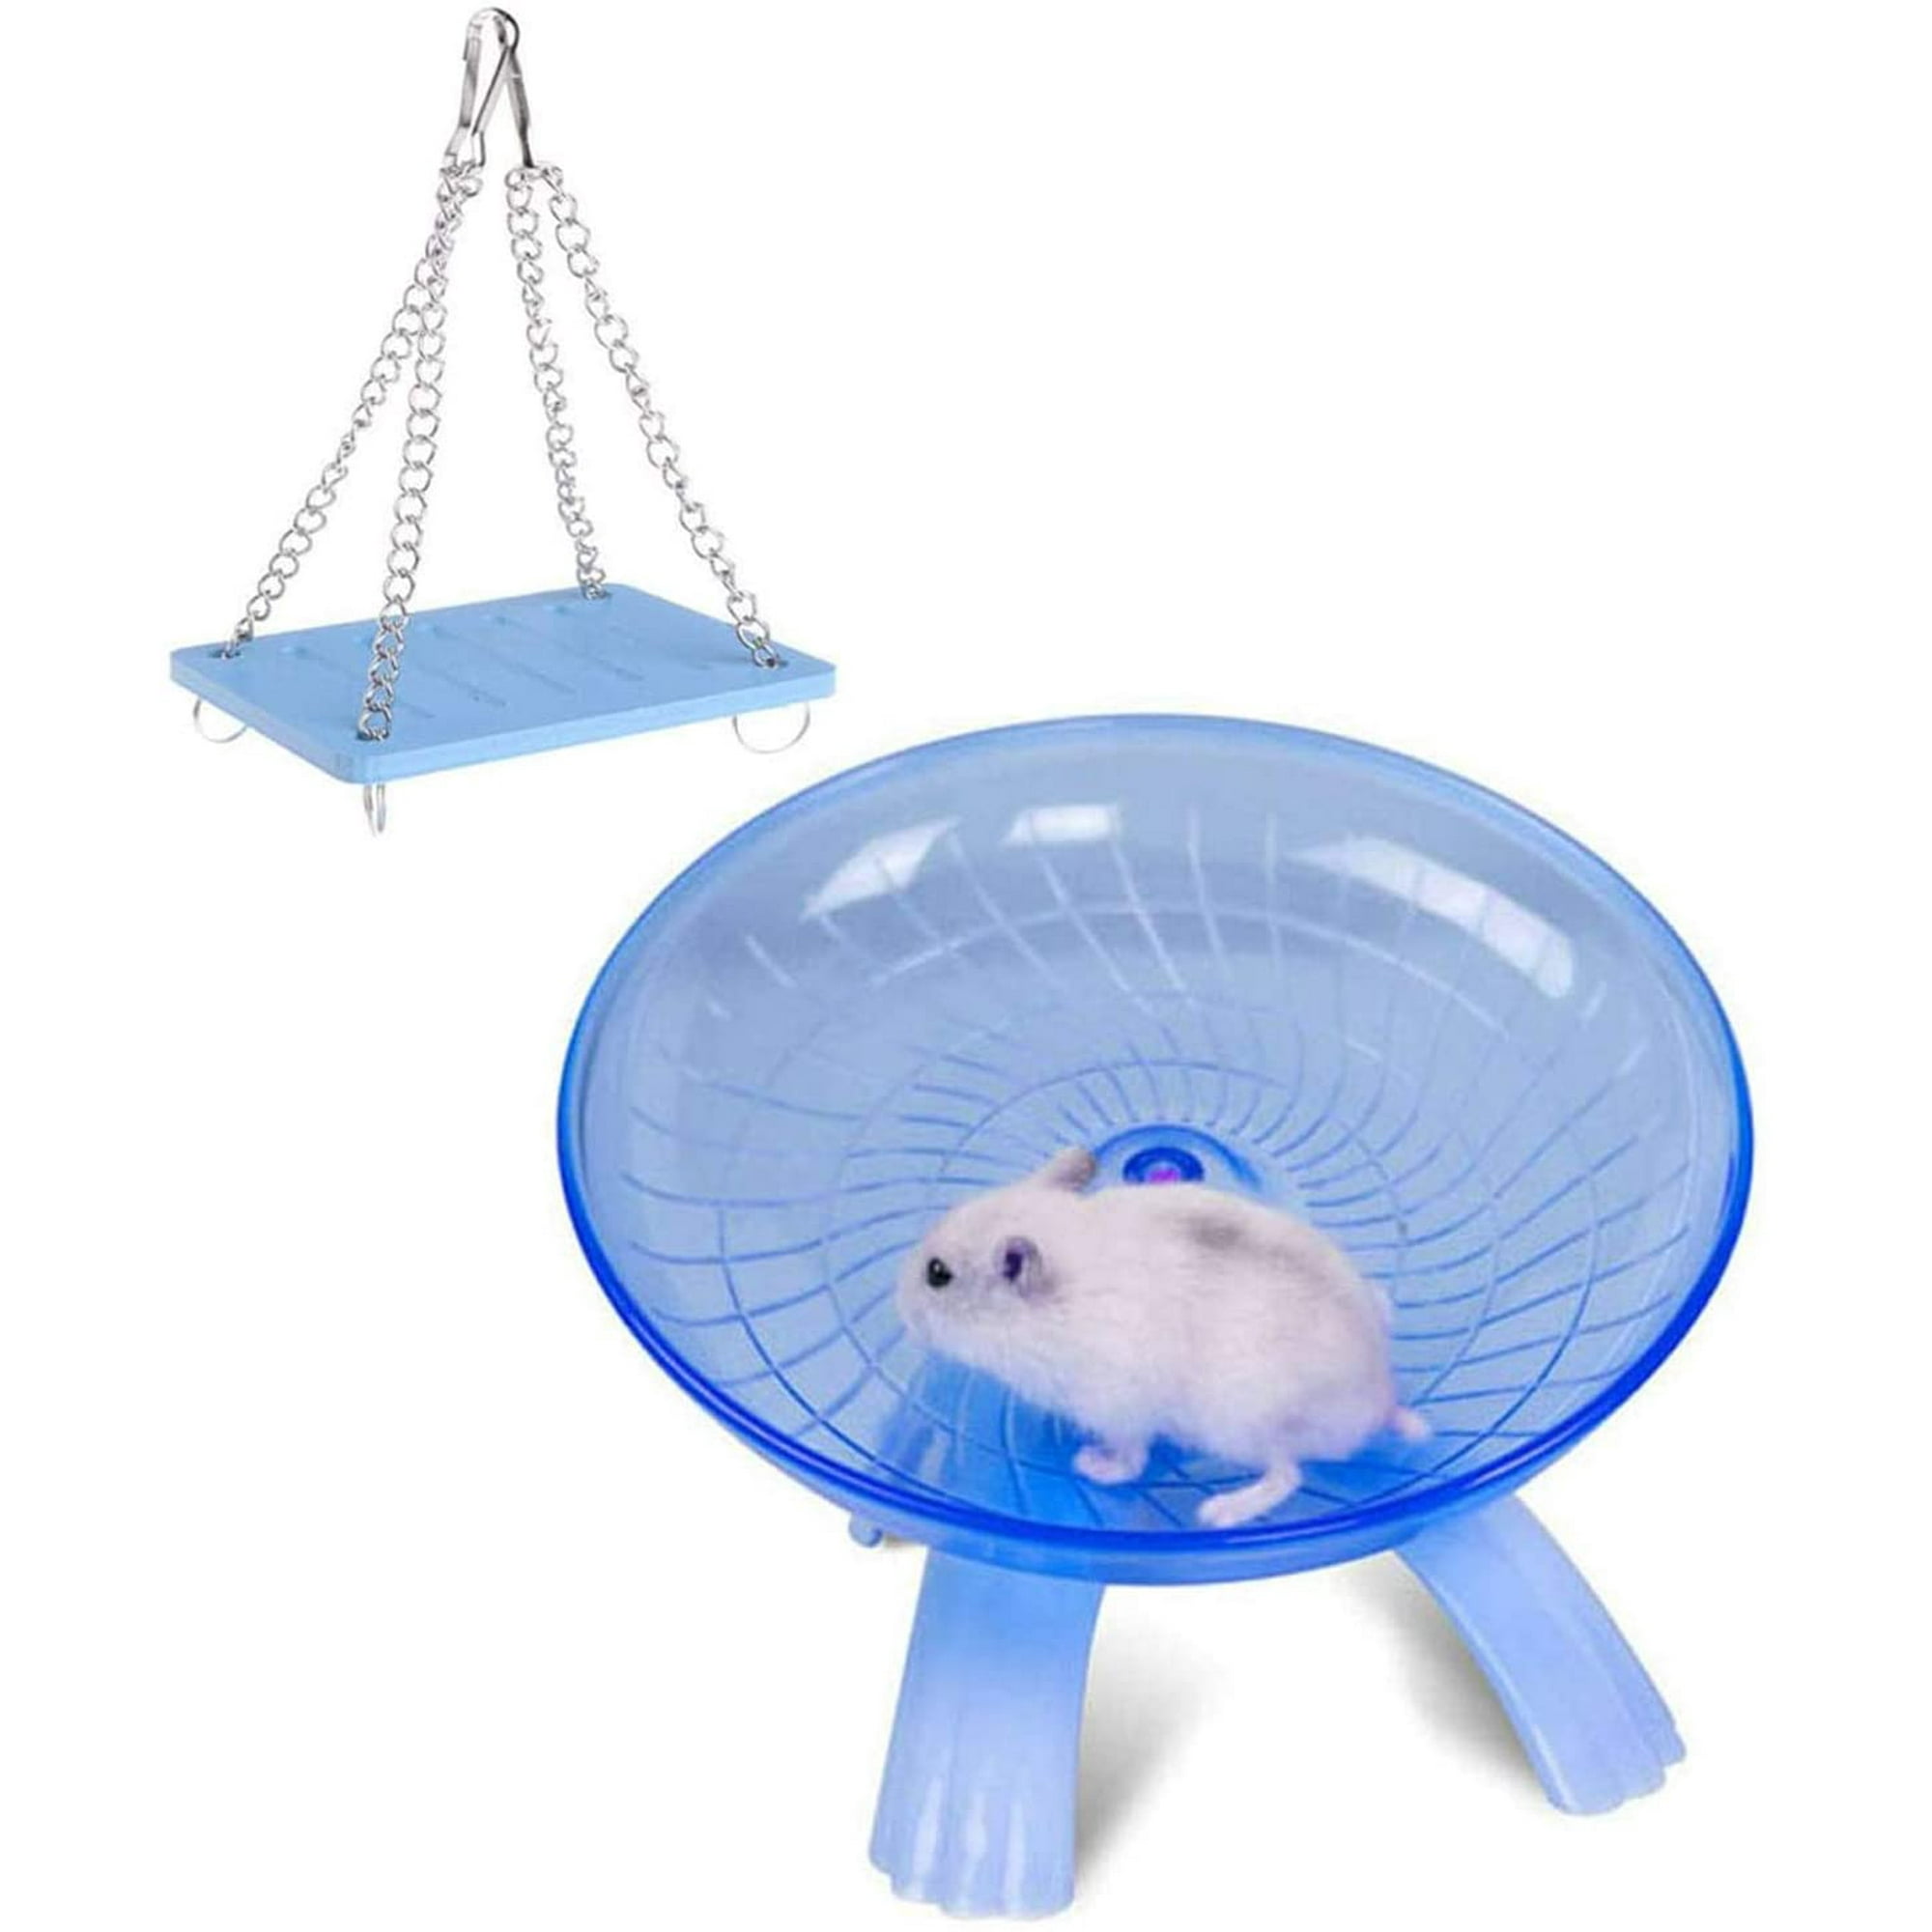 Small Animal Swing Toys，Hamster Flying Saucer Silent Running Exercise Wheel  for Gerbil Rat Mouse Hedgehog Small Animals | Walmart Canada